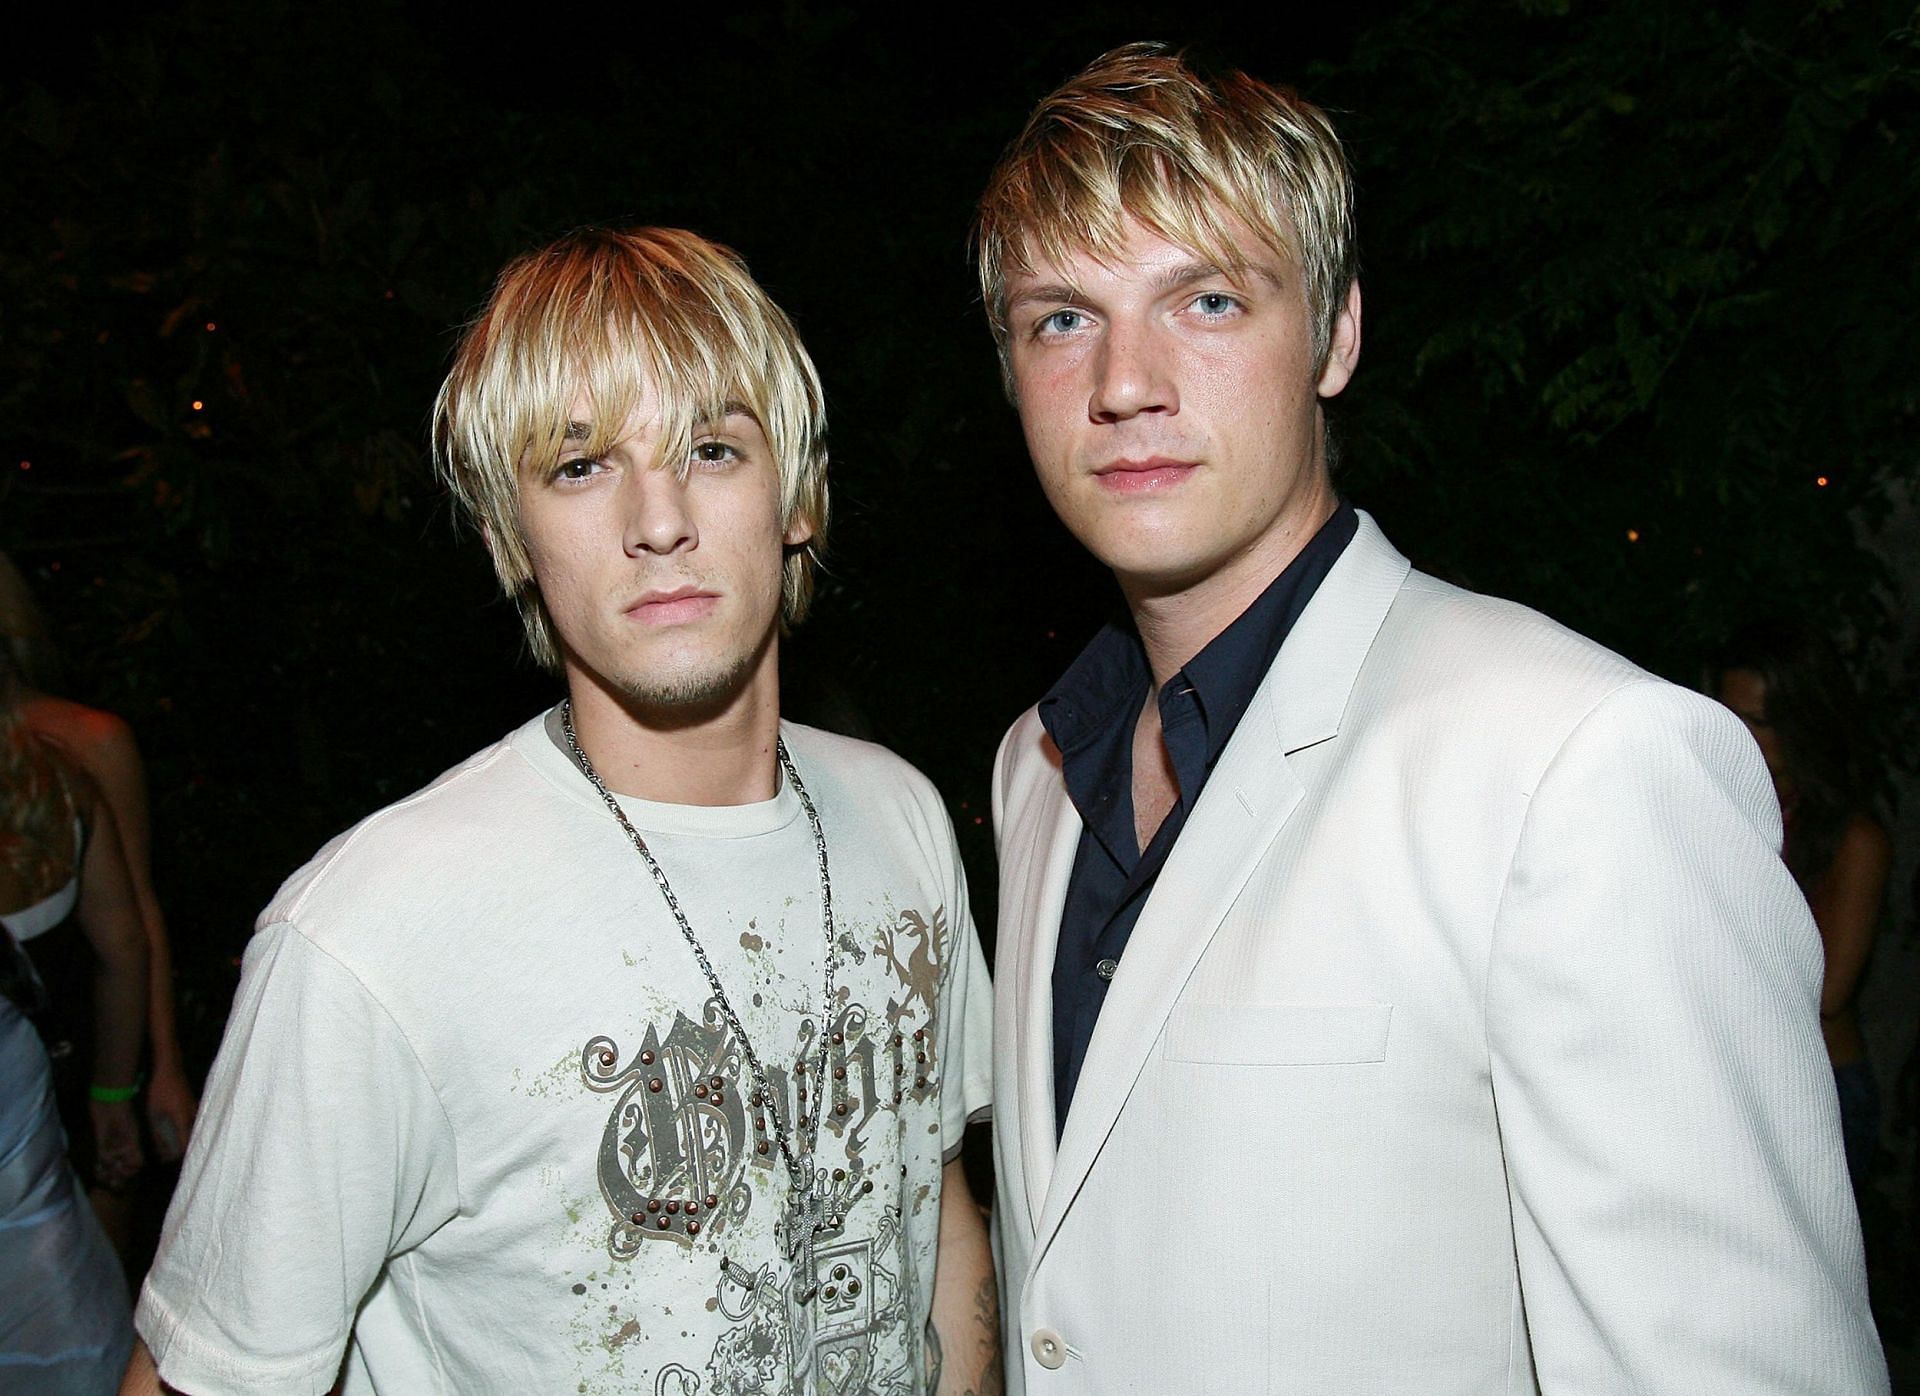 Aaron Carter (L) with brother Nick Carter (R) (Image via Getty Images/Michael Buckner)